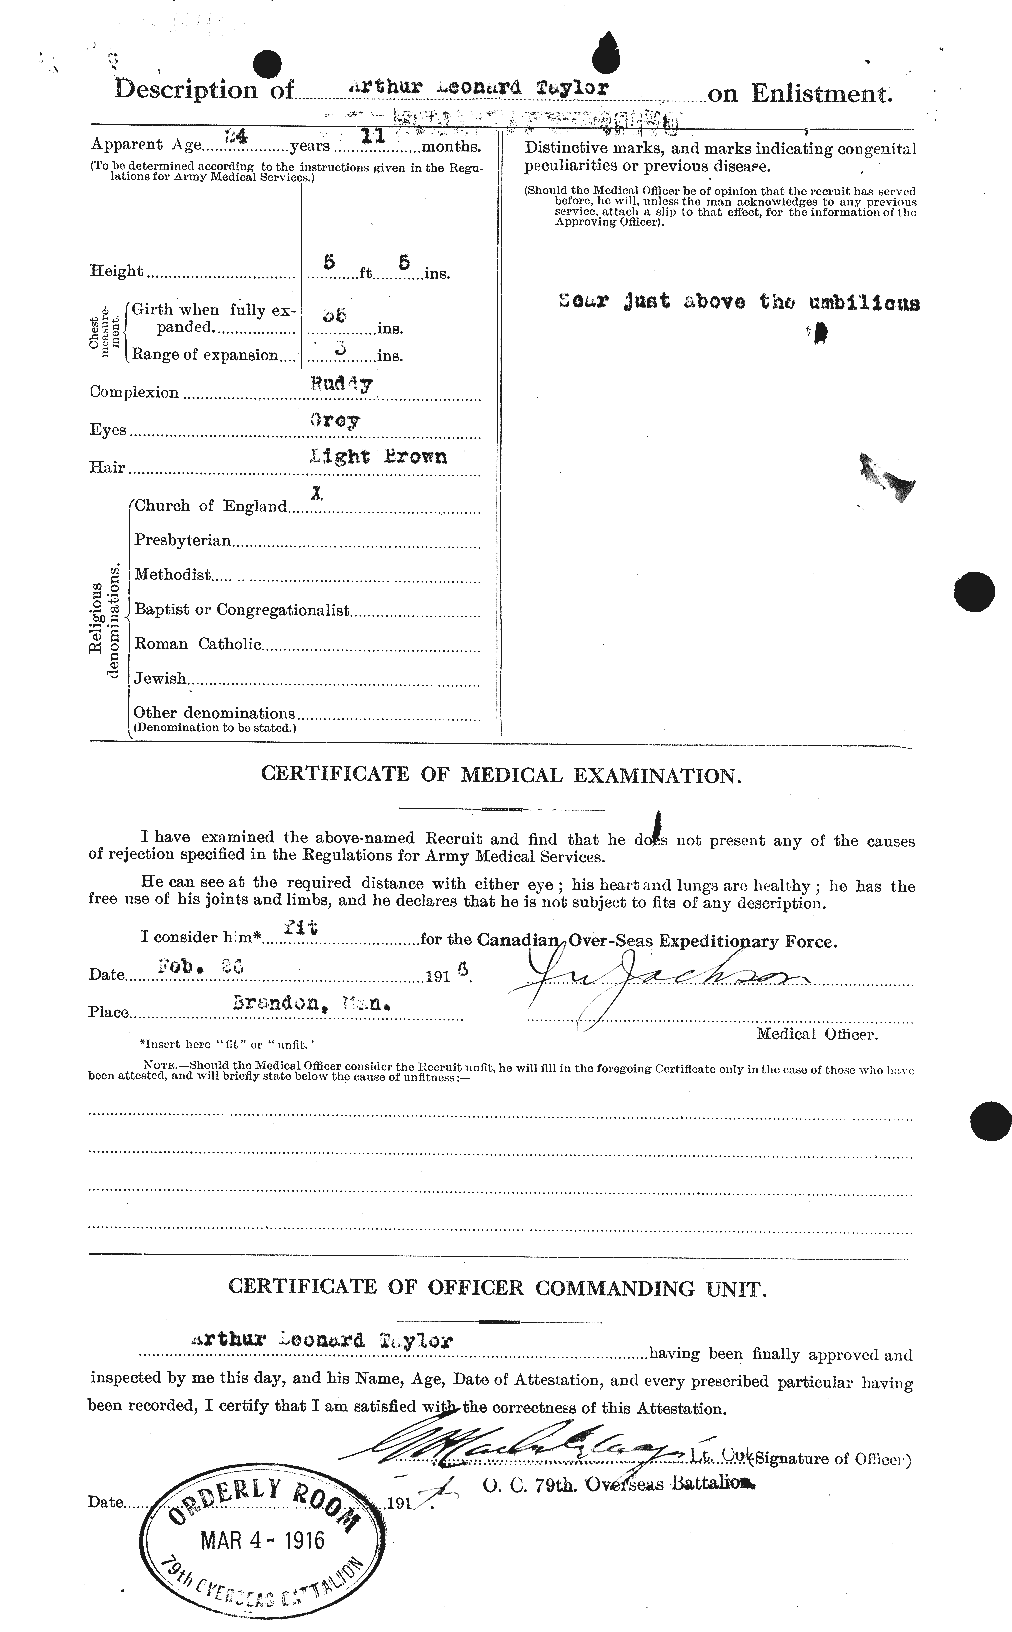 Personnel Records of the First World War - CEF 626736b